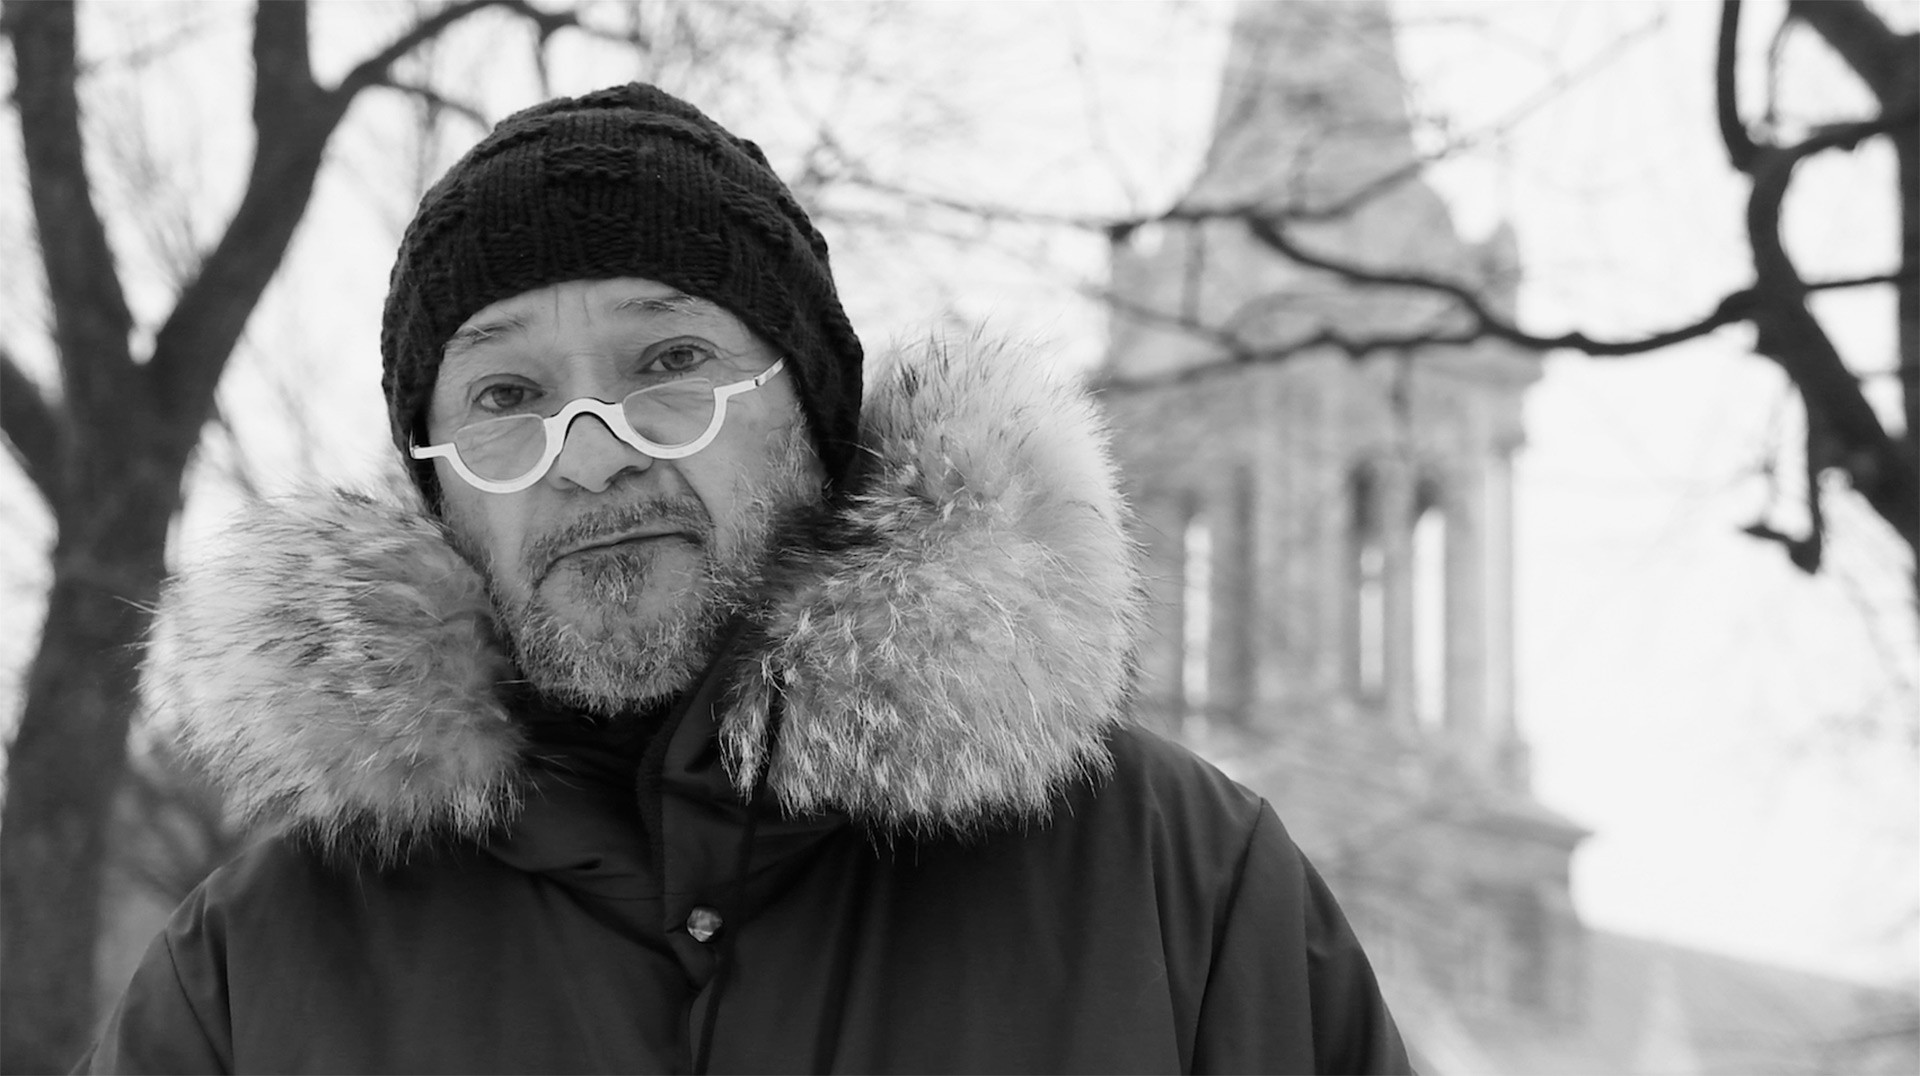 A black and whote image of a man wearing a winter parka, tuque and white-rimmed glasses